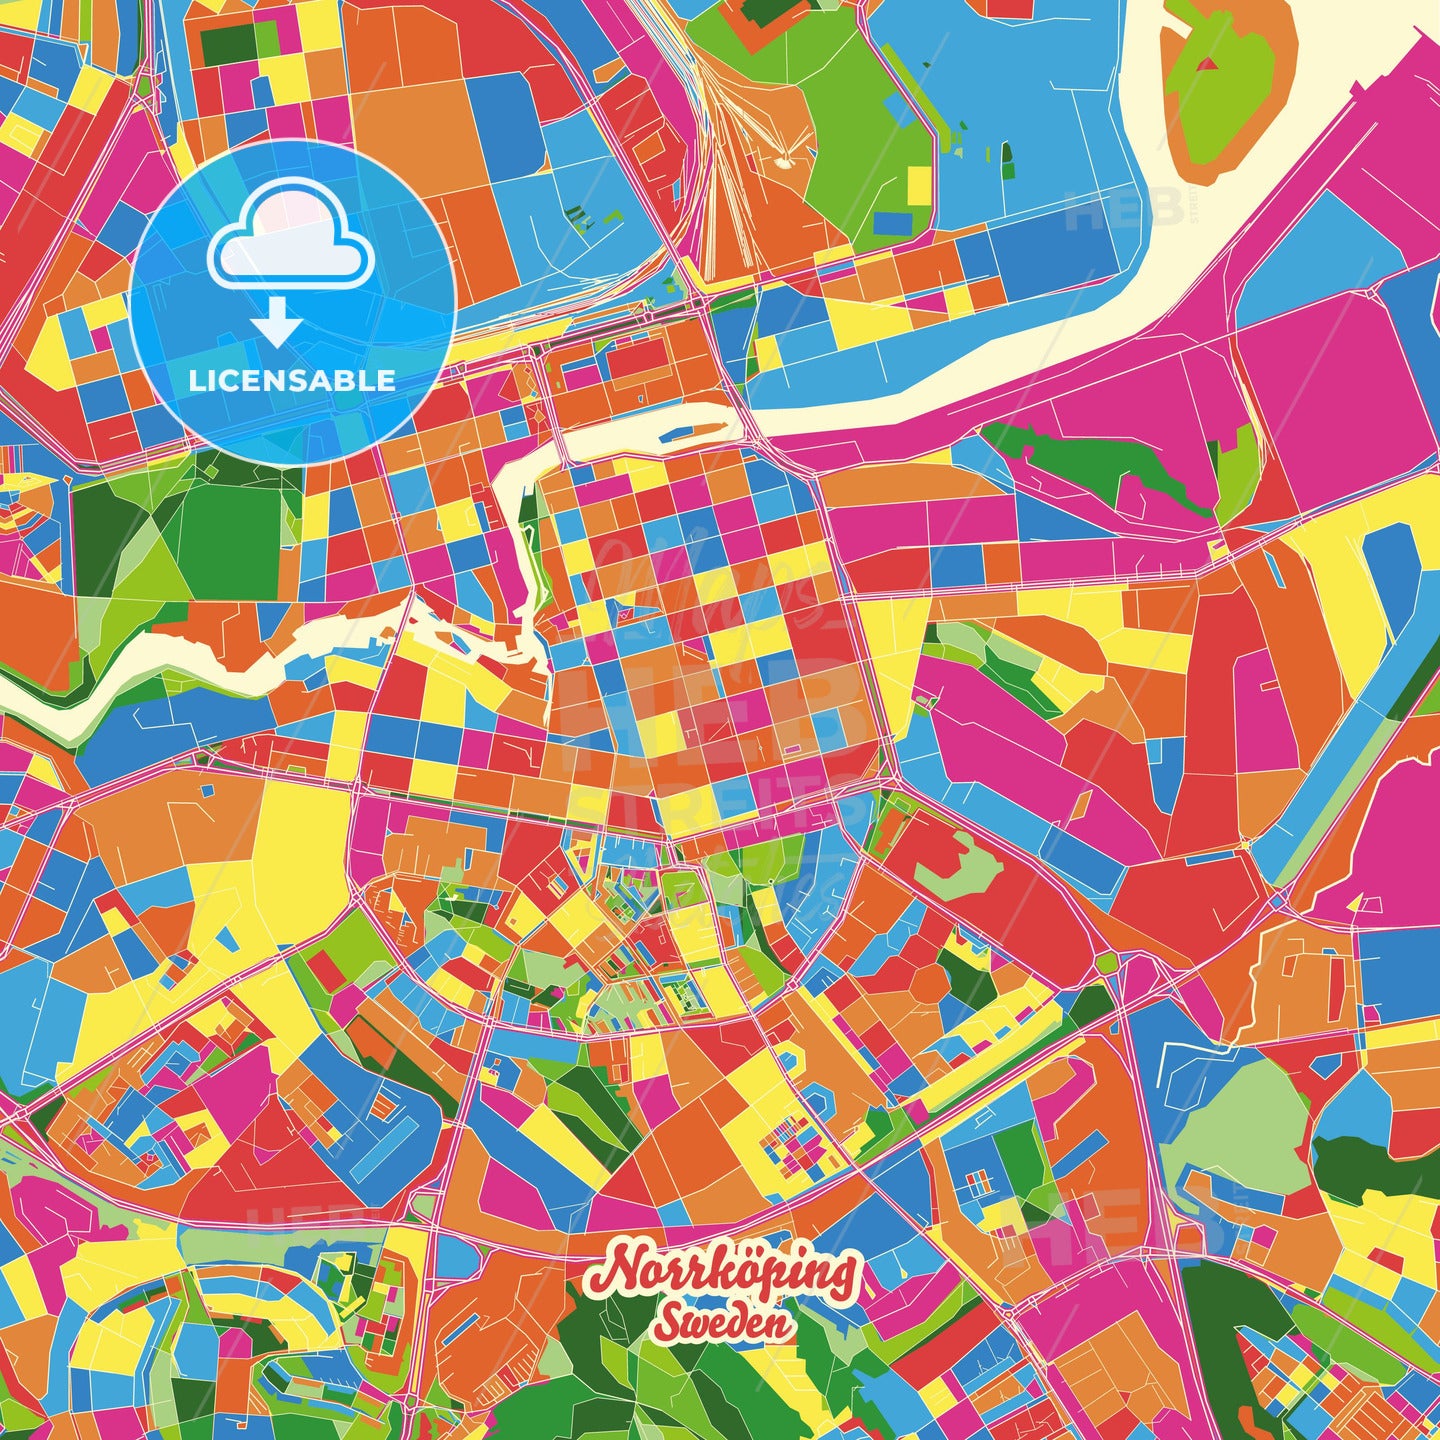 Norrköping, Sweden Crazy Colorful Street Map Poster Template - HEBSTREITS Sketches